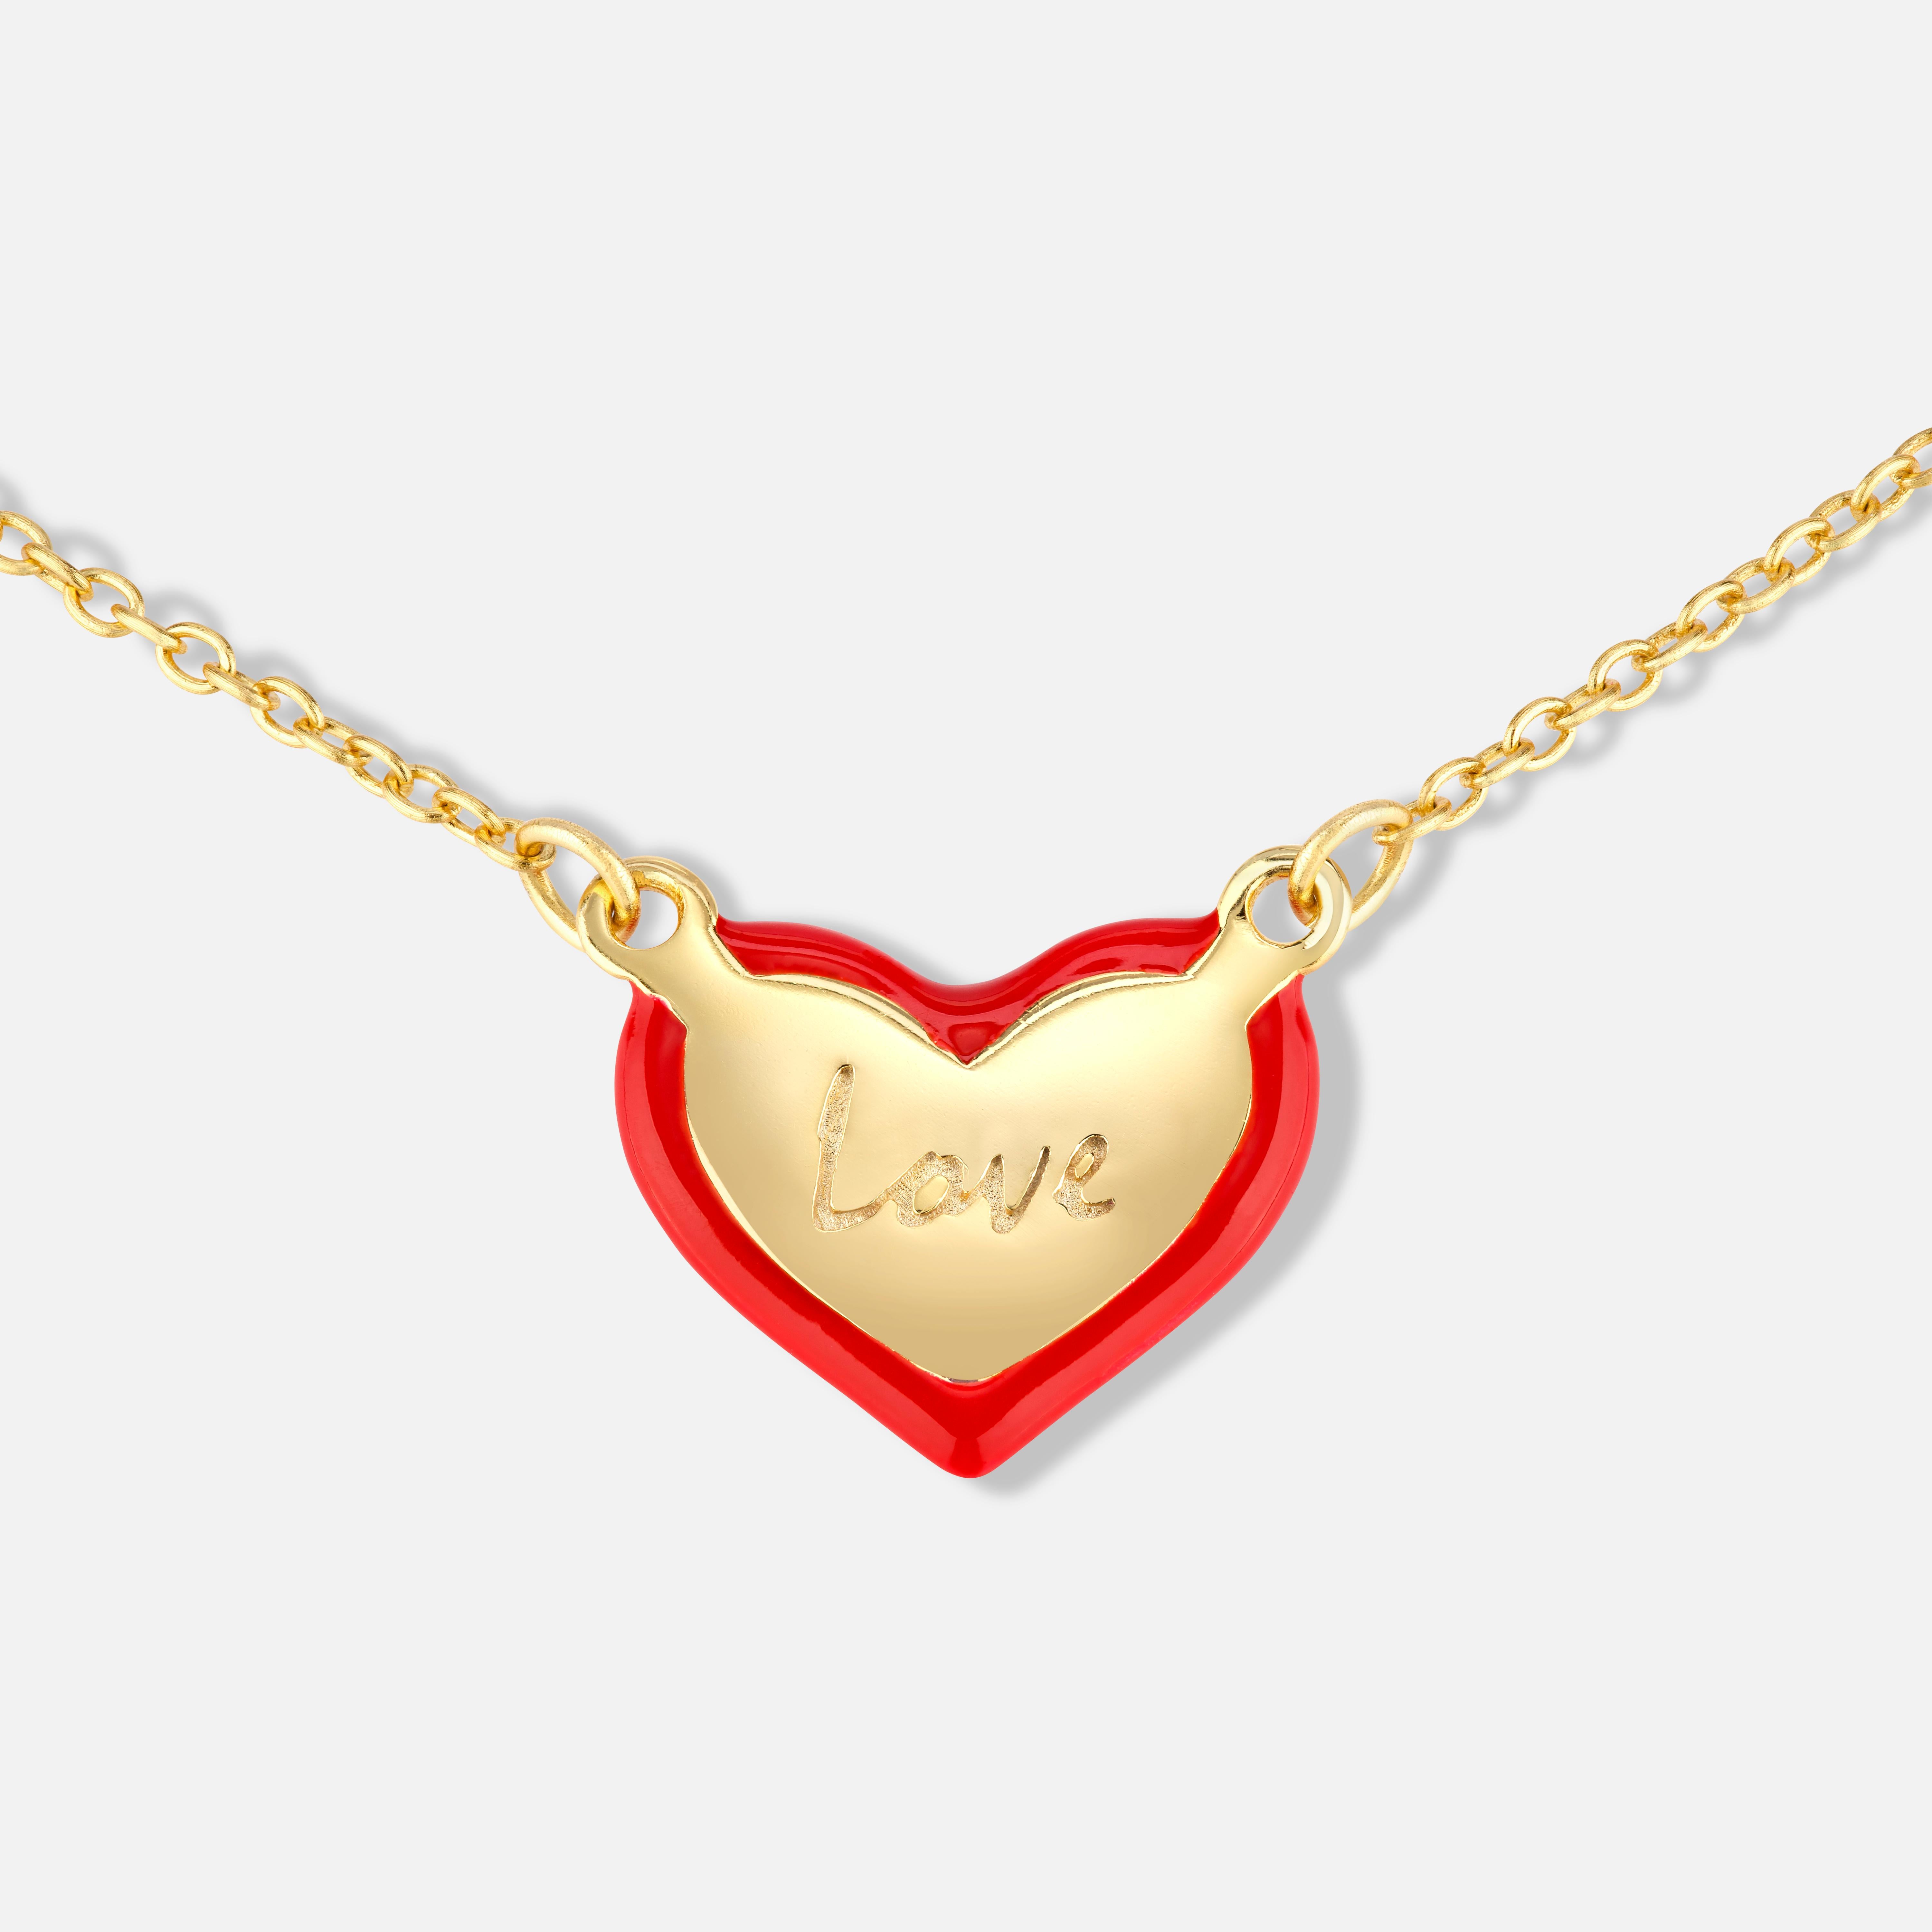 A perfect gift to your beloved and yourself. 

A classic, if not THE classic of all motifs, reinterpreted in a fresh and vibrant way.
The meticulously crafted silver chain is 18K gold-plated. The enamel heart is crafted in 3D, giving it a full